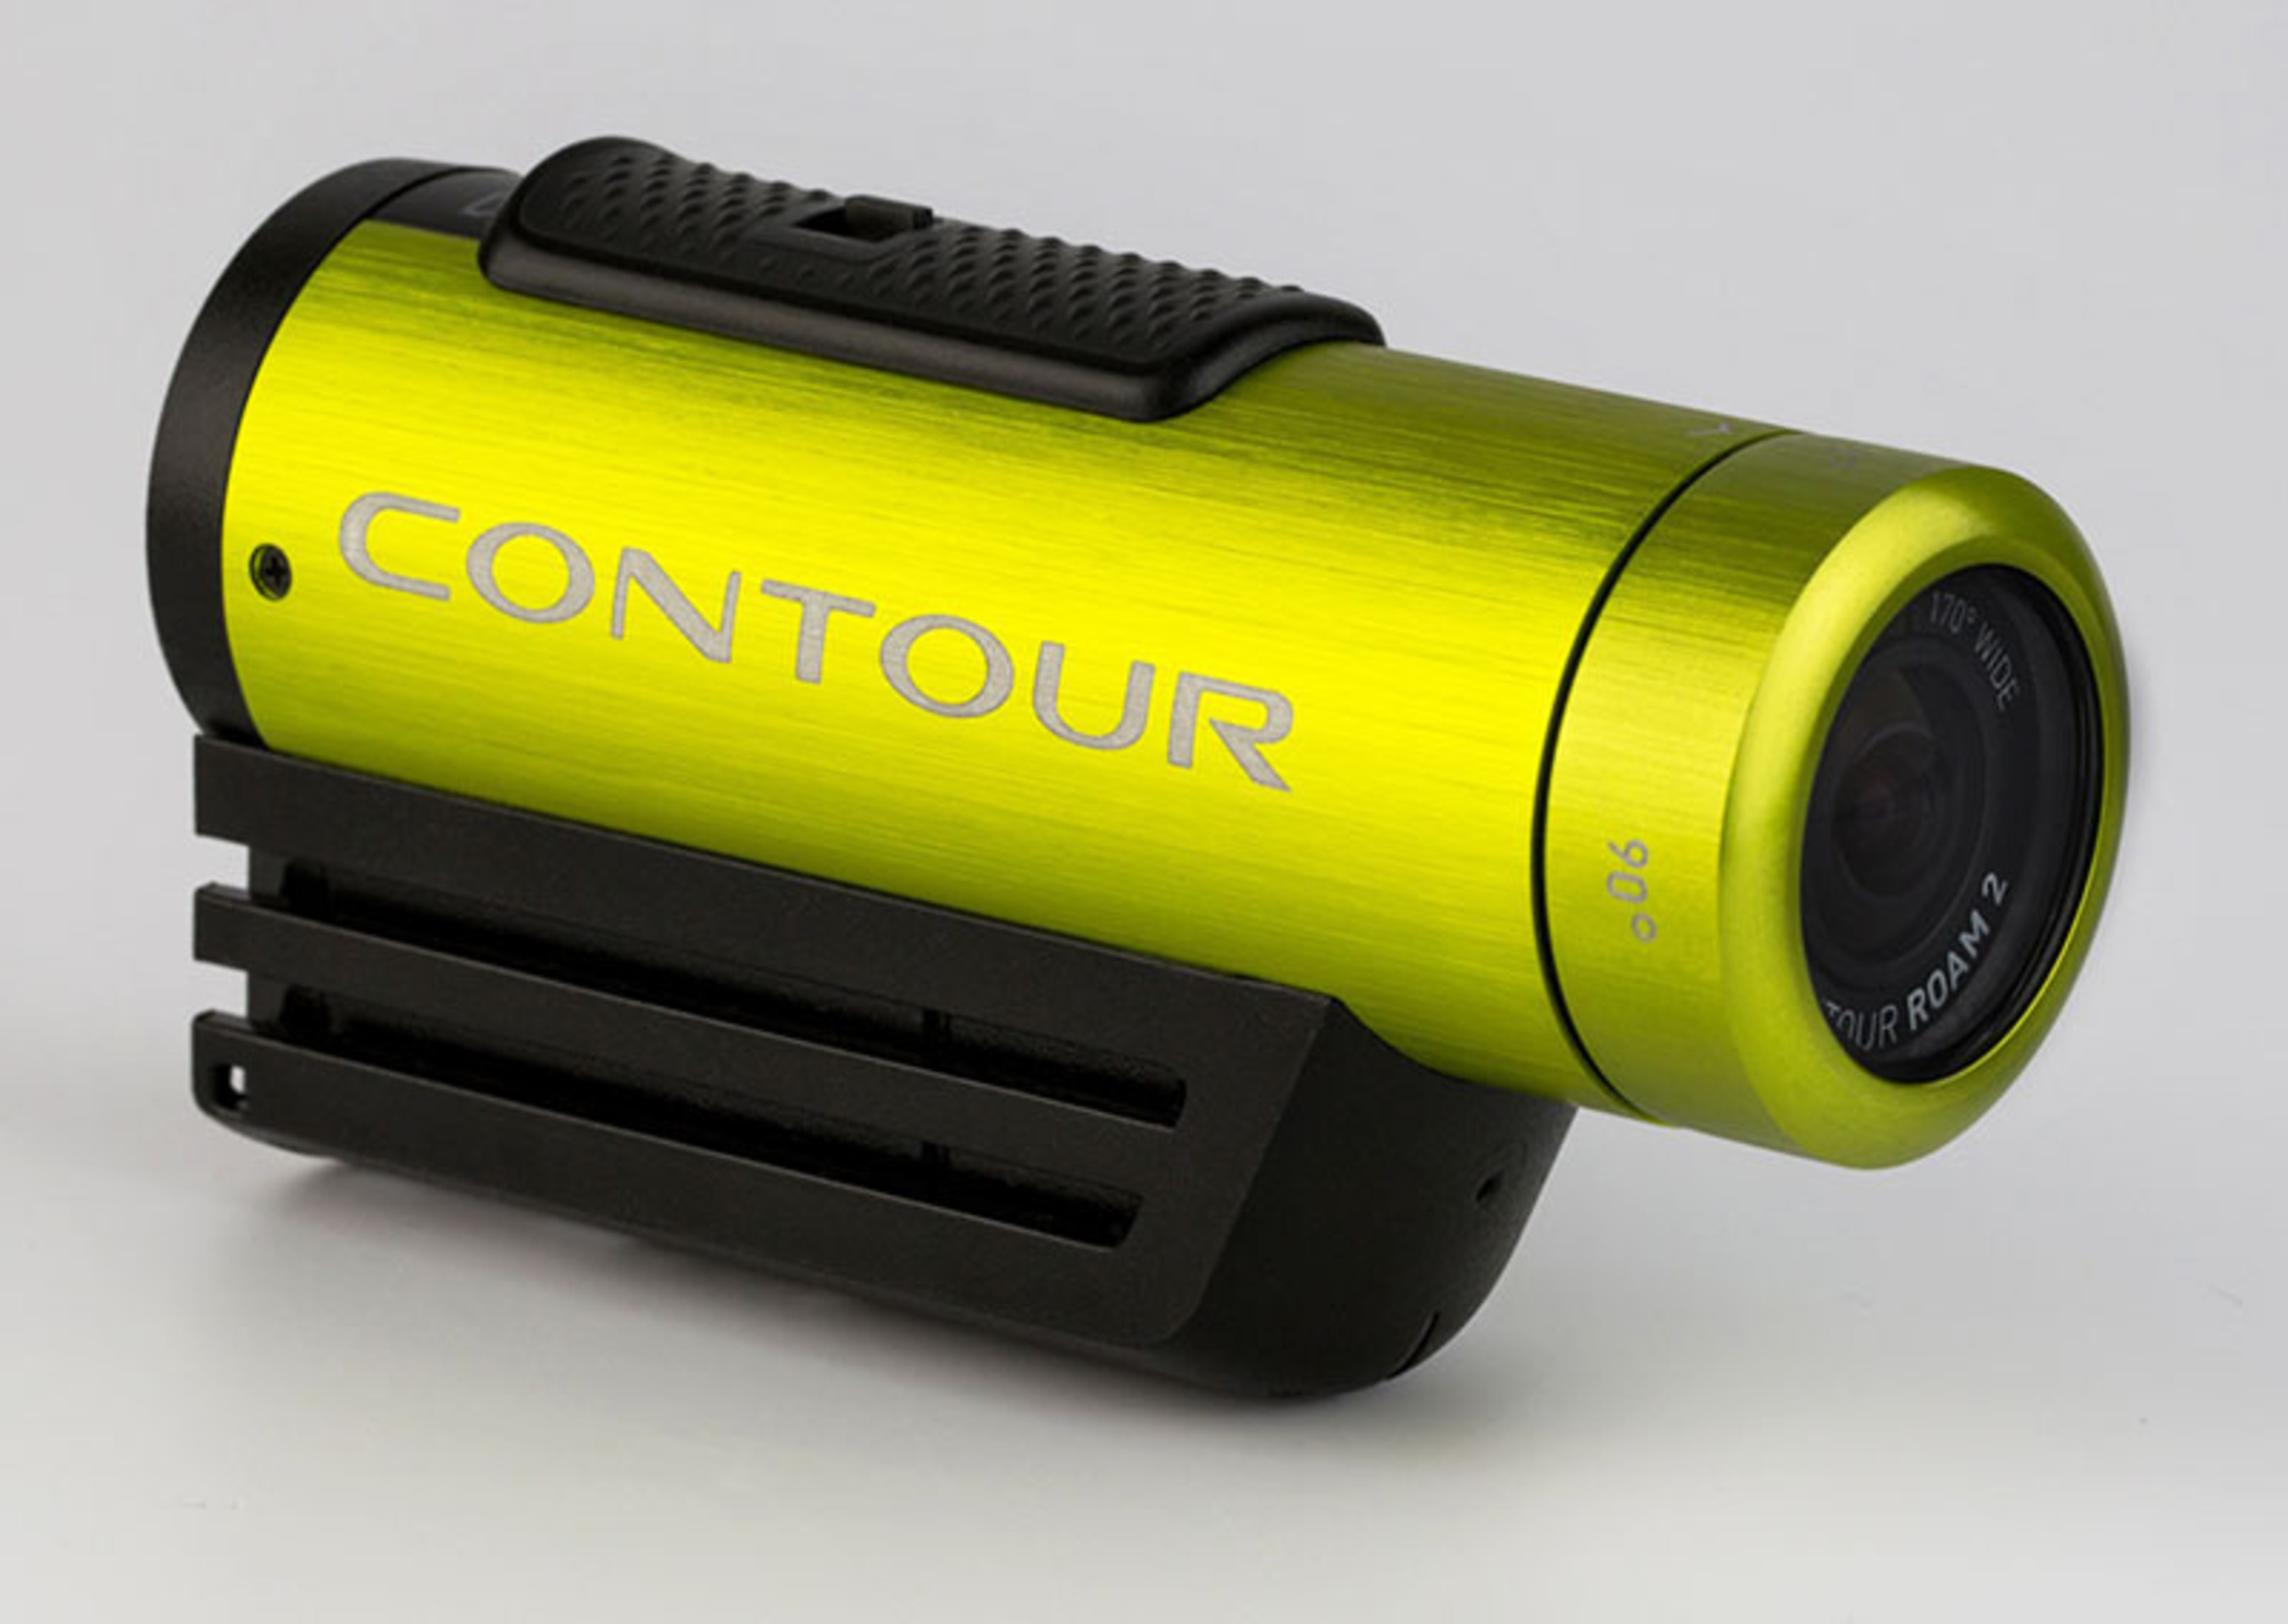 The easy-to-use waterproof ContourROAM2 brings color to your world along with 60fps, and beautiful HD video. Contour 2 Includes GPS video mapping. (PRNewsFoto/Icon Networks) (PRNewsFoto/ICON NETWORKS)